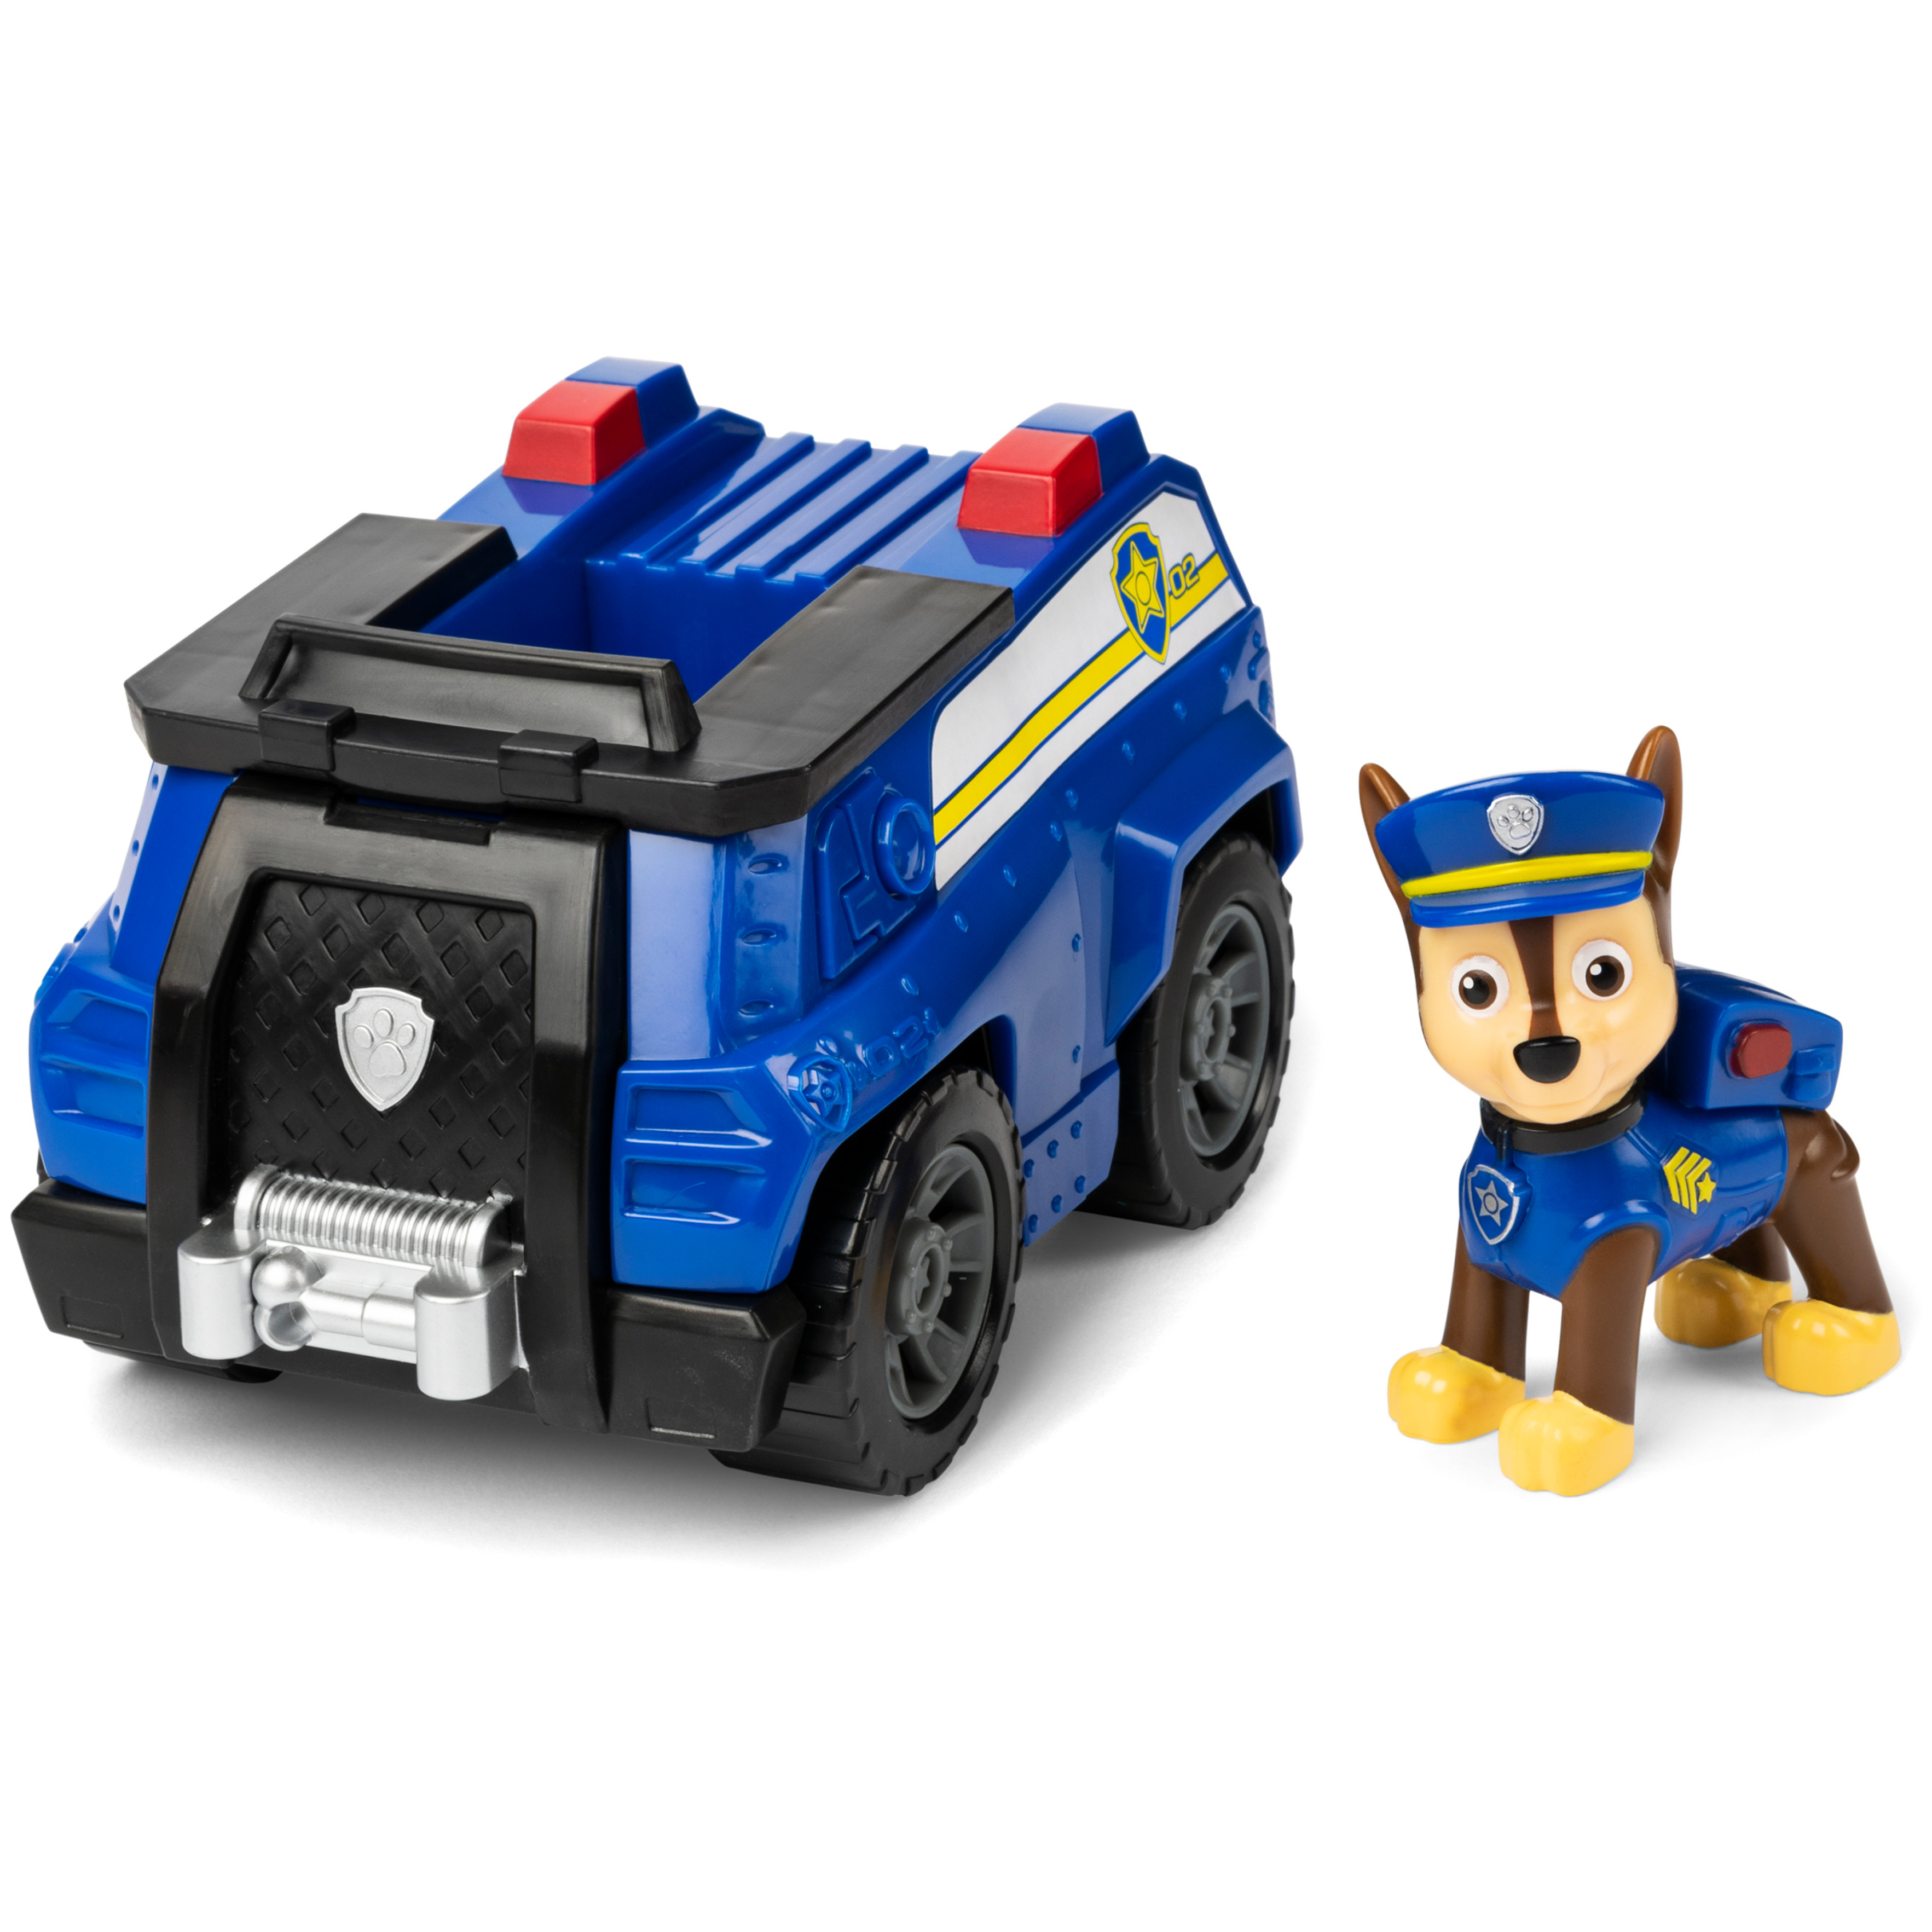 PAW Patrol, Chase’s Patrol Cruiser Vehicle with Collectible Figure - image 1 of 5